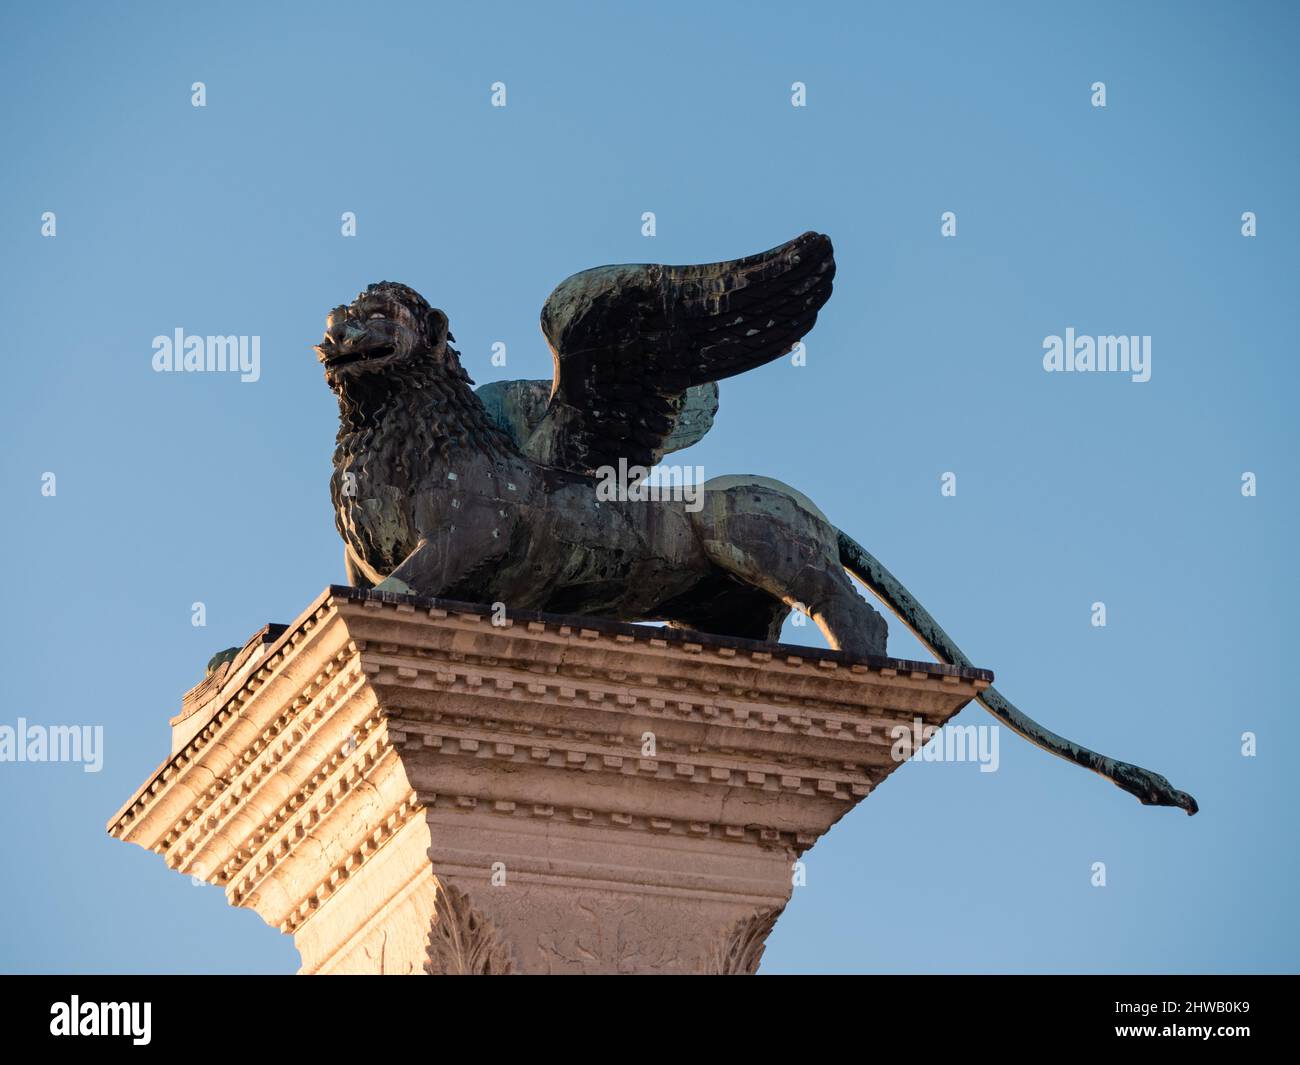 Lion of Venice Bronze Sculpture on the Column of Saint Mark on the Piazzetta San Marco Square in Venice, Italy Stock Photo